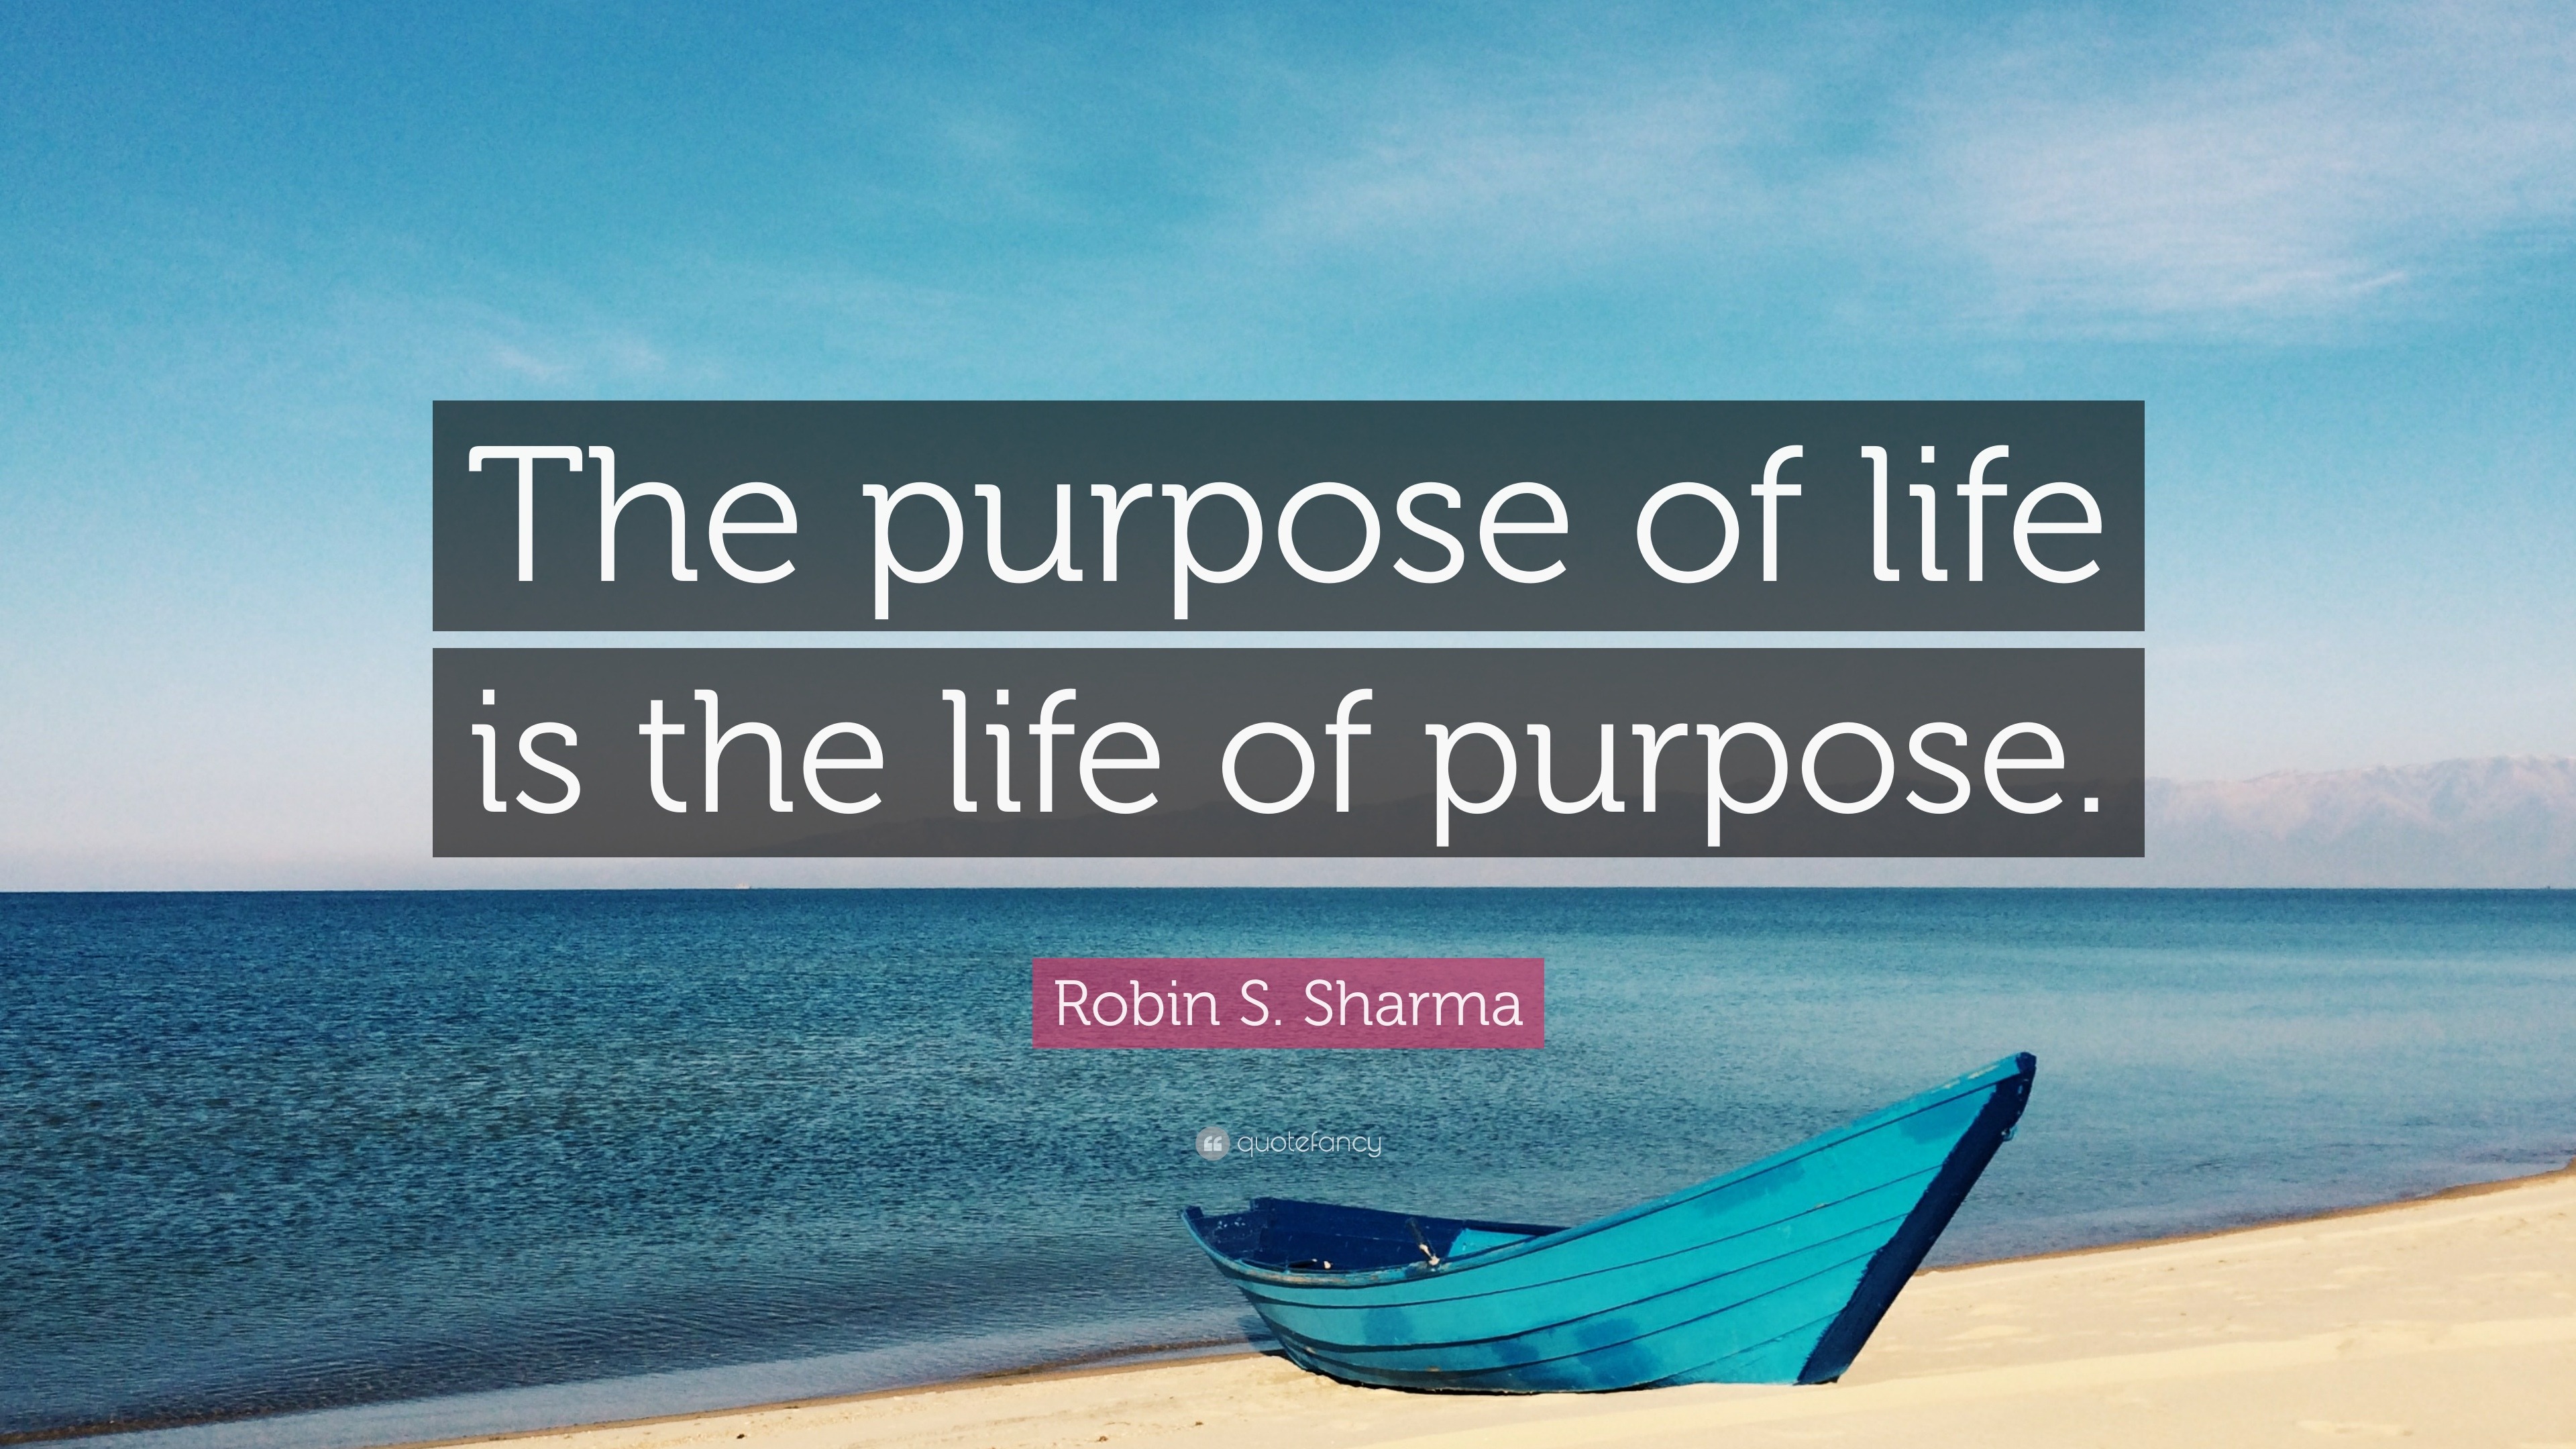 Robin S. Sharma Quote: “The purpose of life is the life of purpose.”